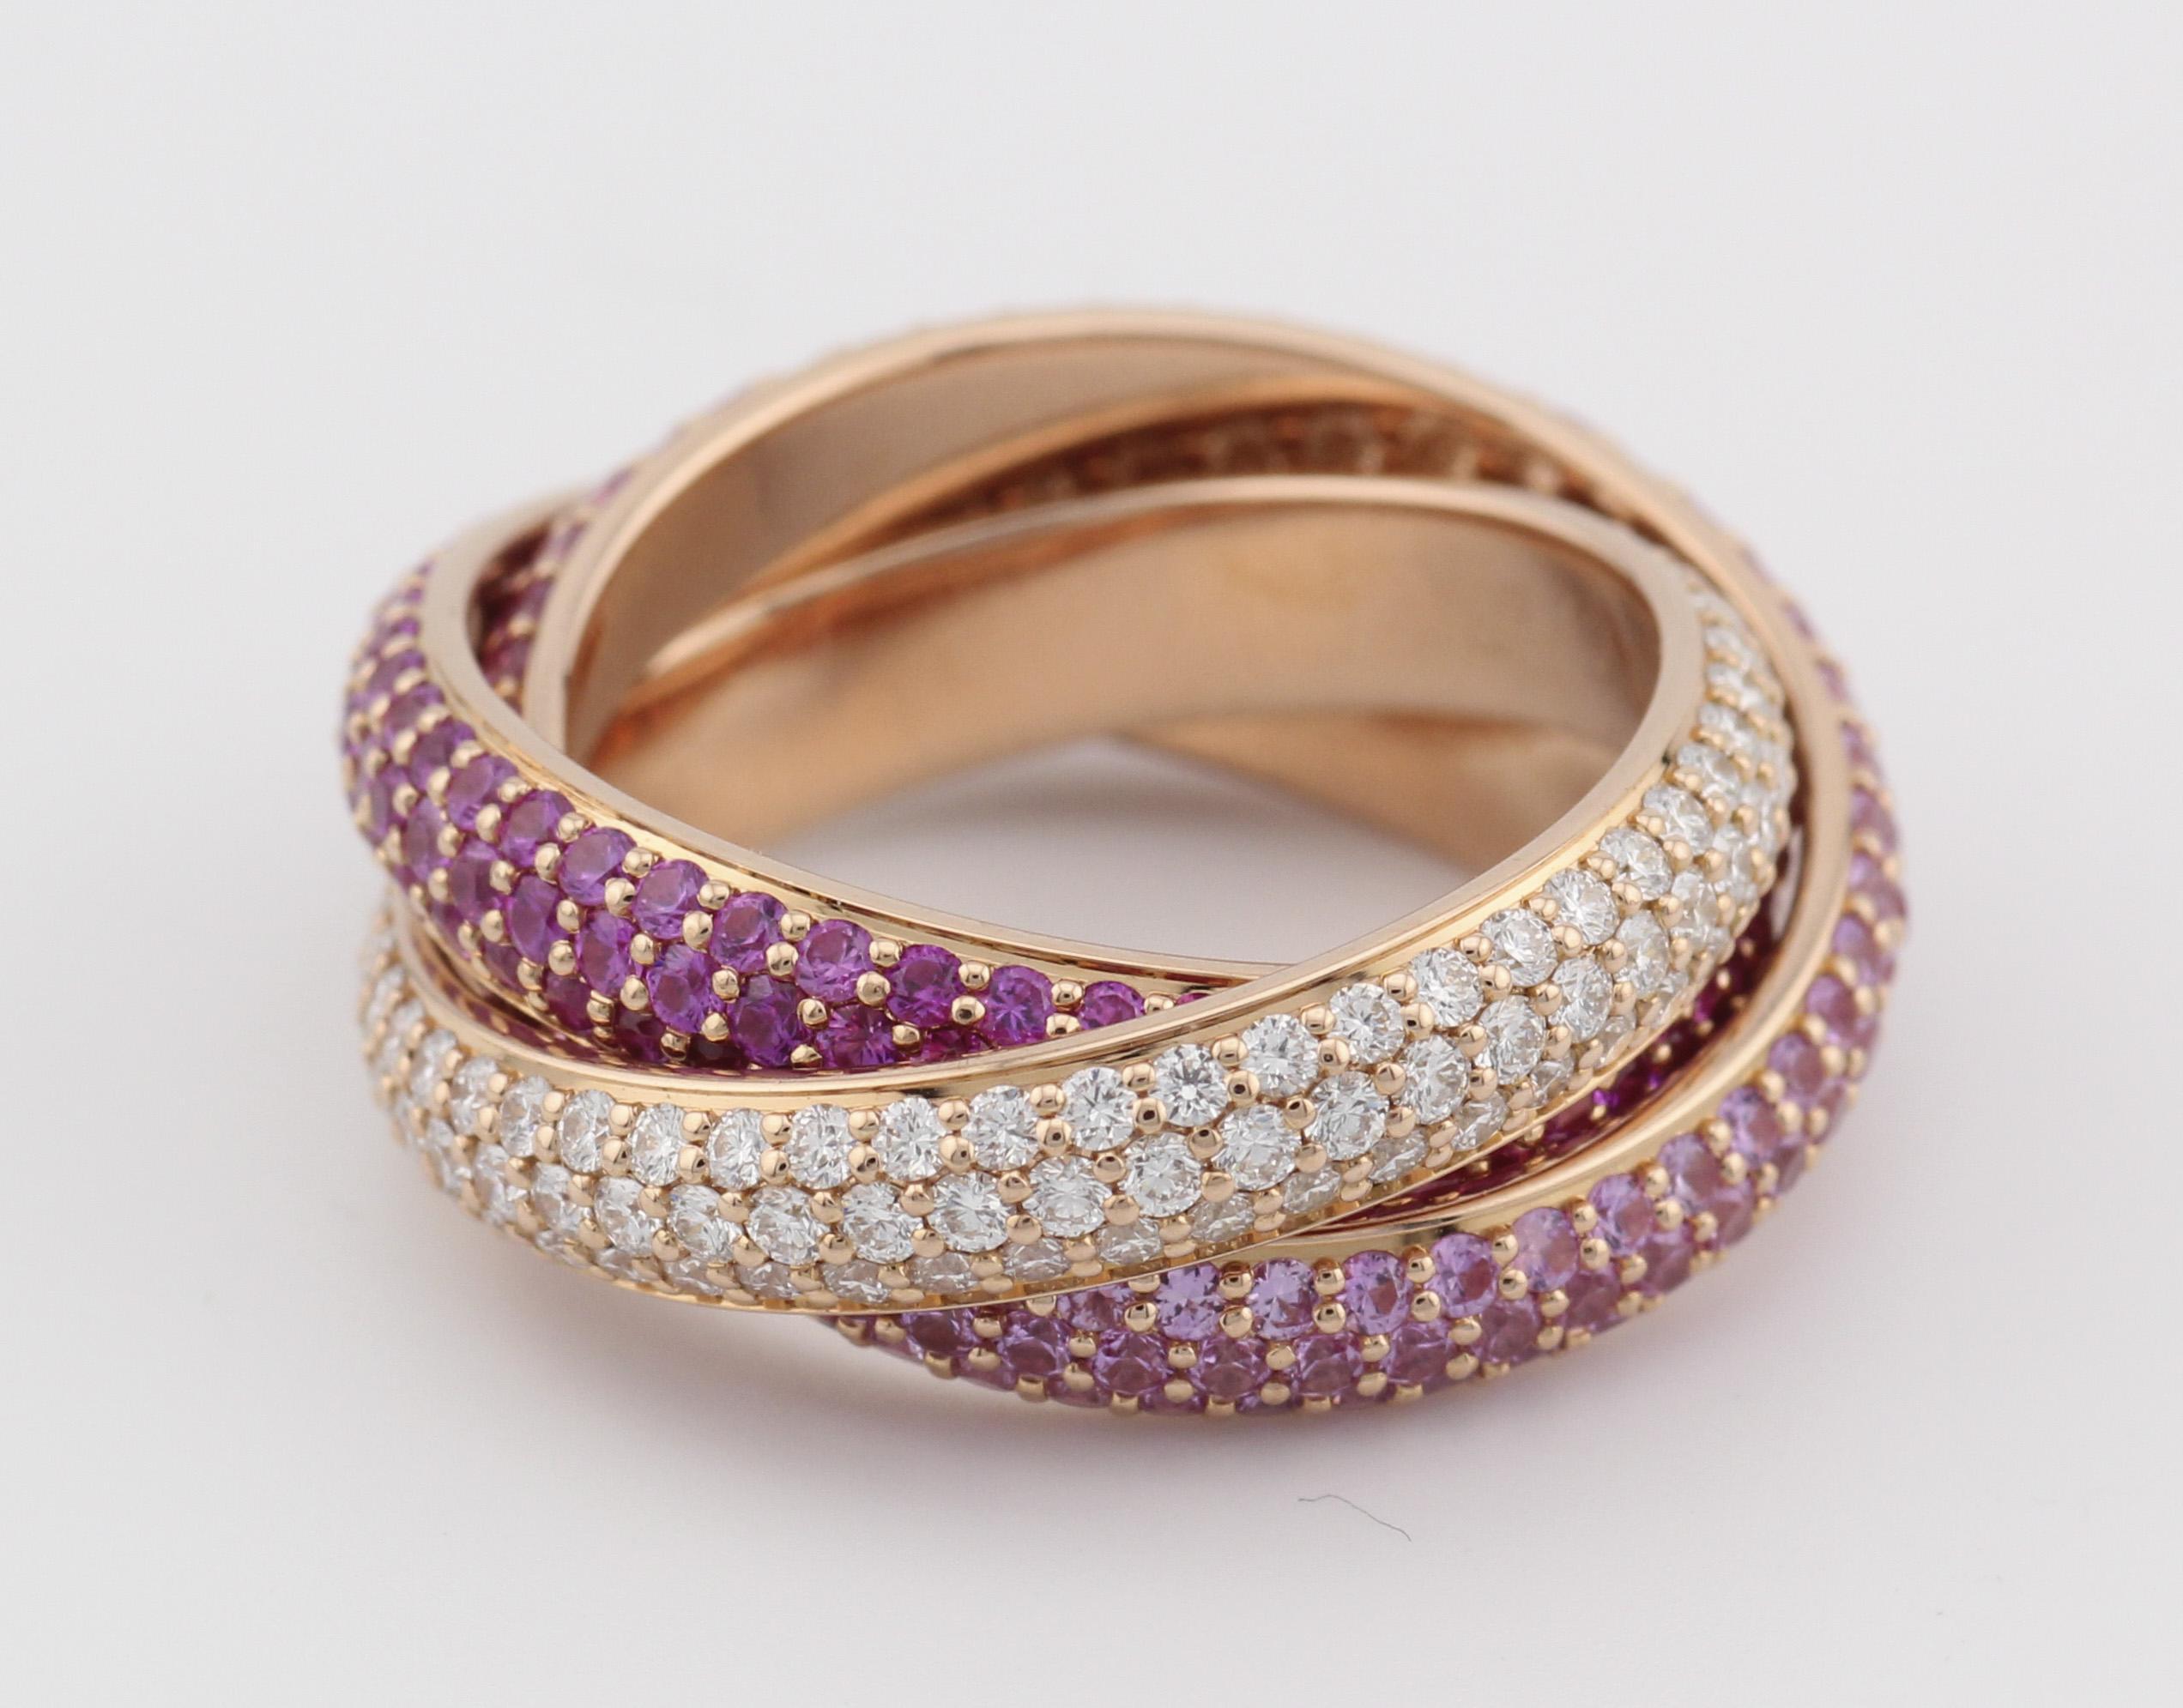 The Cartier Trinity Pink Sapphire Ruby Diamond 18K Rose Gold Band is an exquisite piece of jewelry that seamlessly blends elegance with vibrancy. Crafted by the renowned luxury brand Cartier, this band is a testament to impeccable craftsmanship and